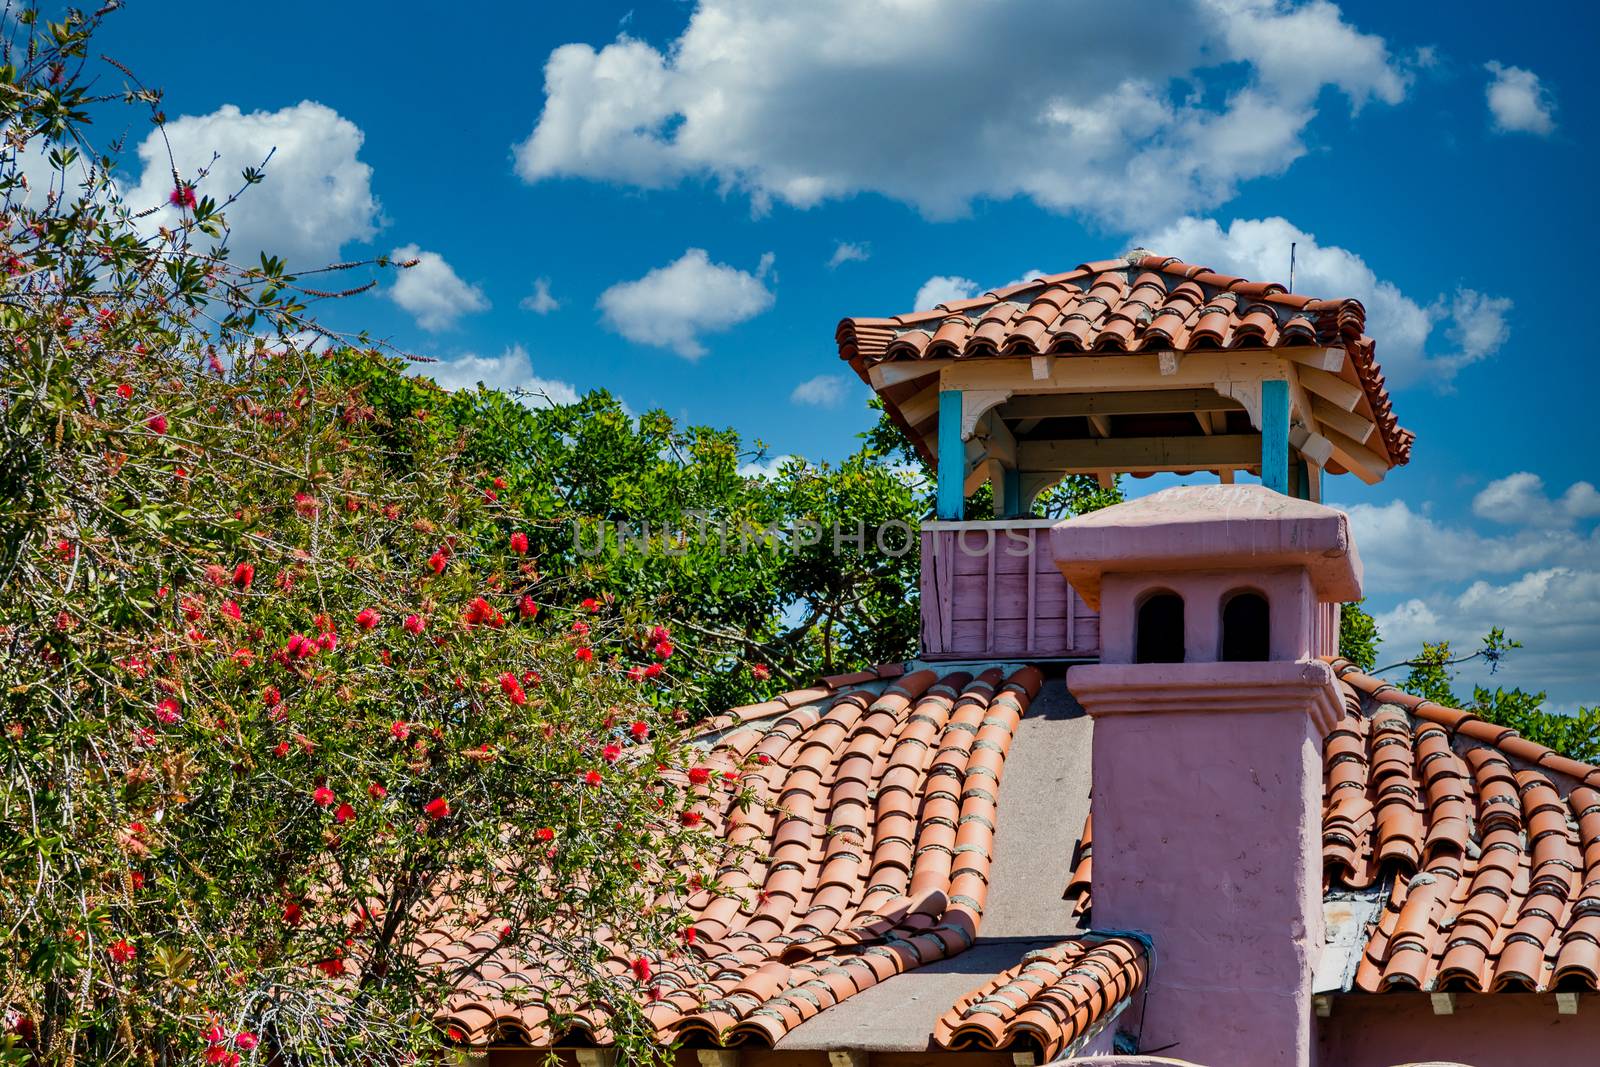 A red clay tile roof on a plaster hacienda